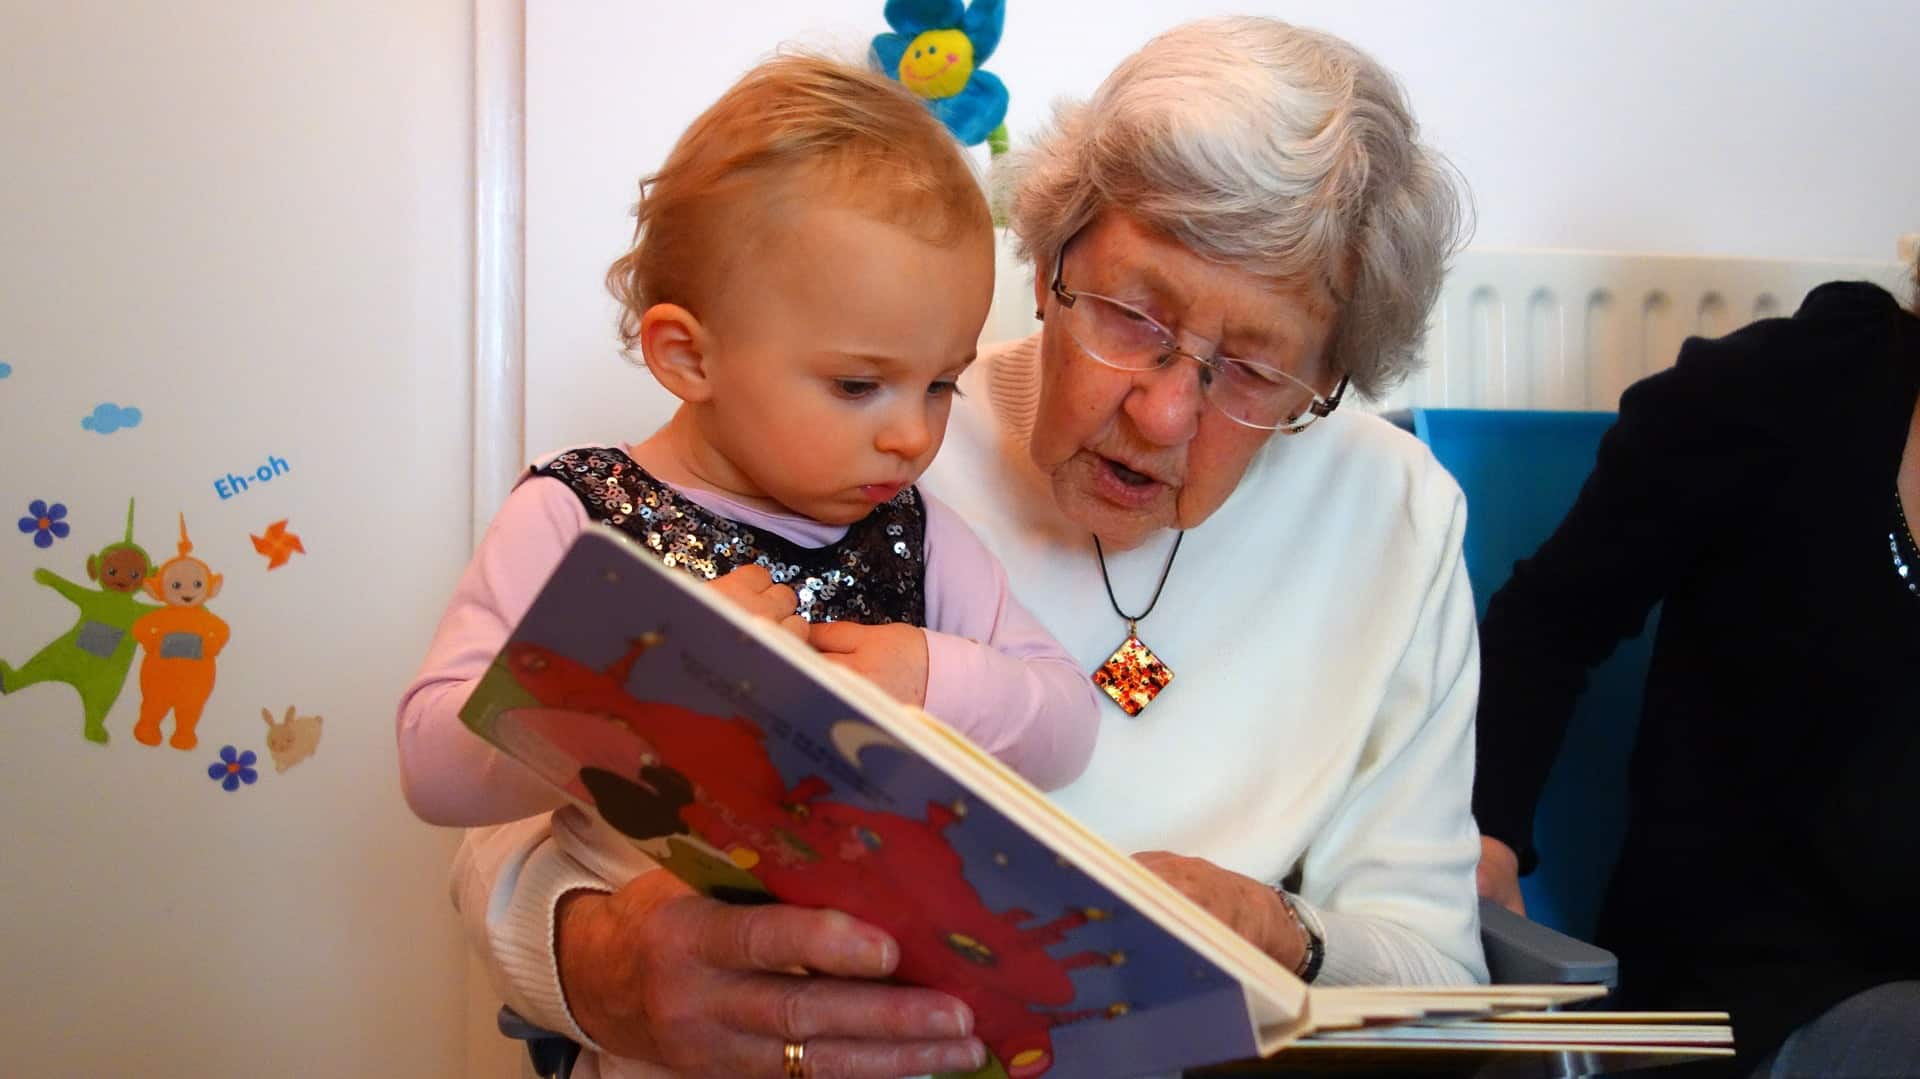 the benefits of reading aloud for children go beyond story time